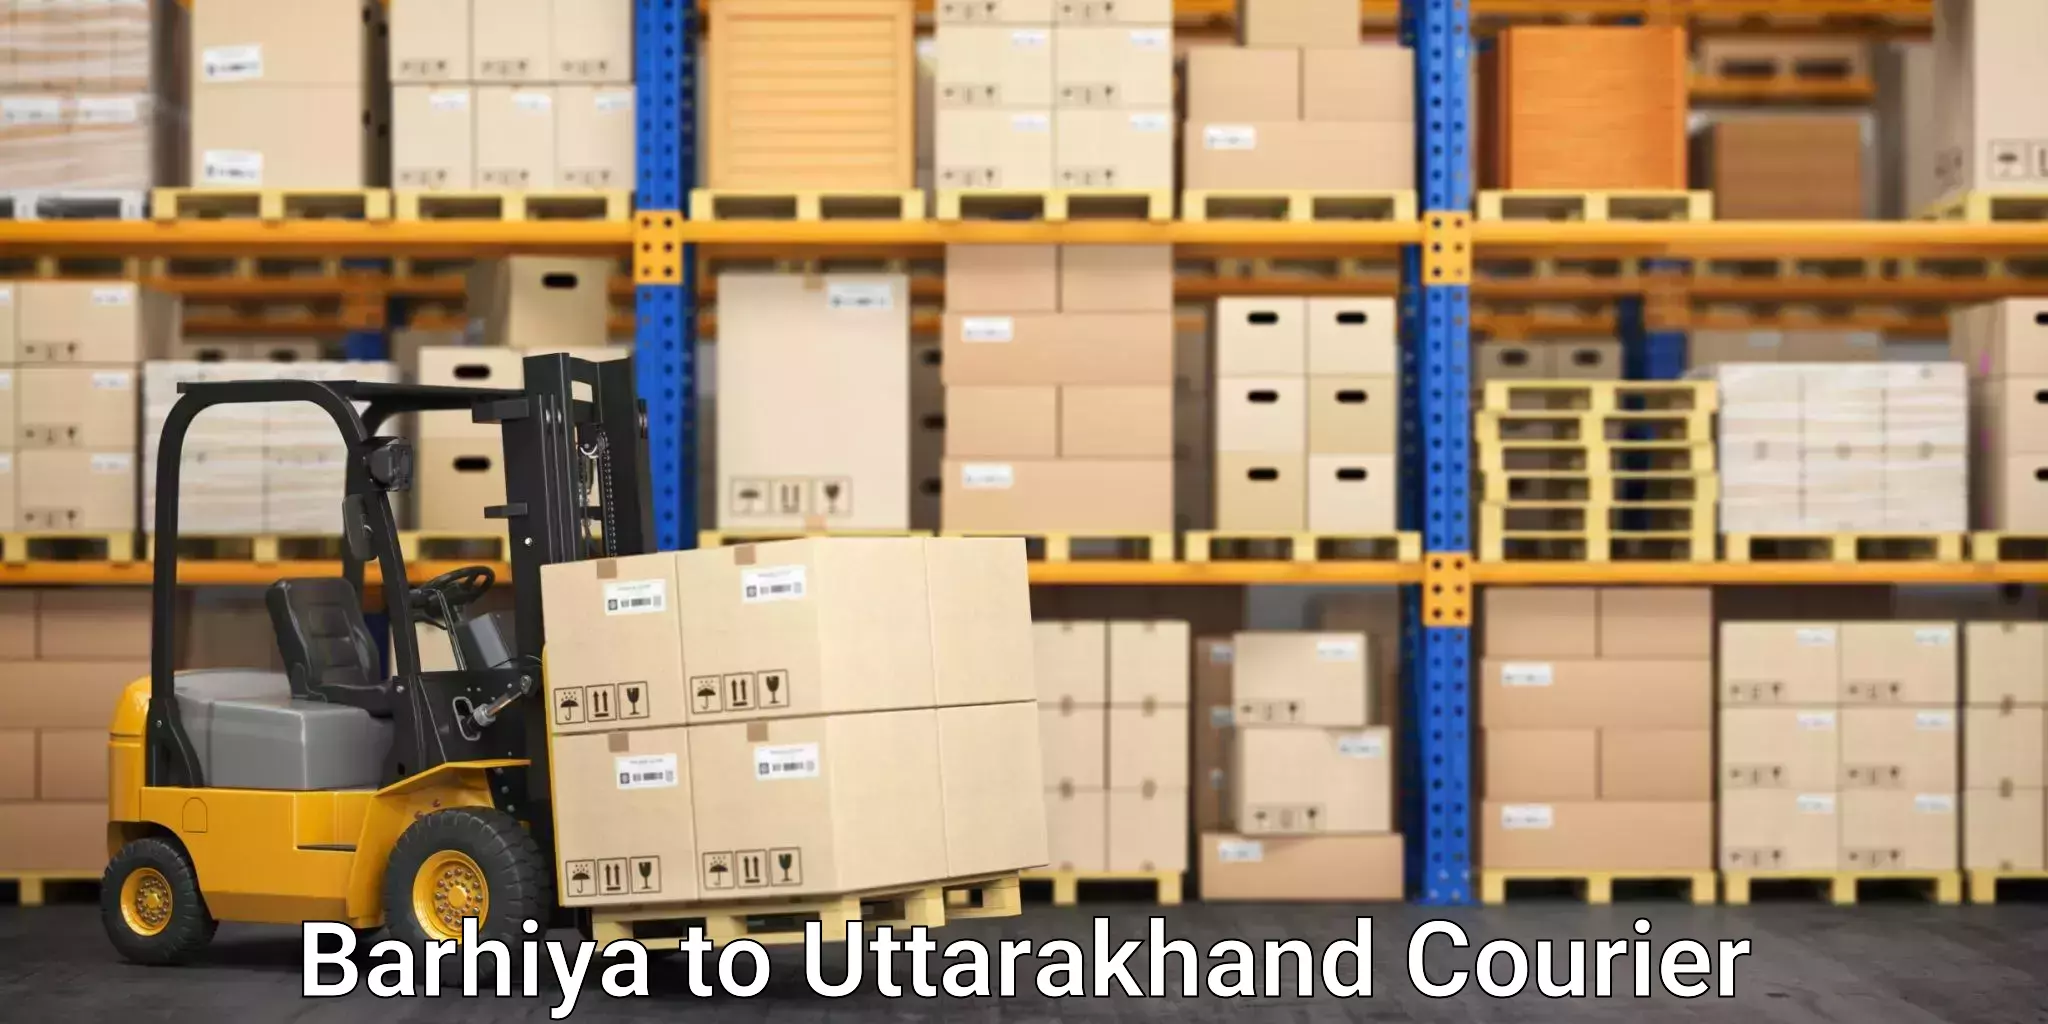 Professional movers and packers in Barhiya to Uttarakhand